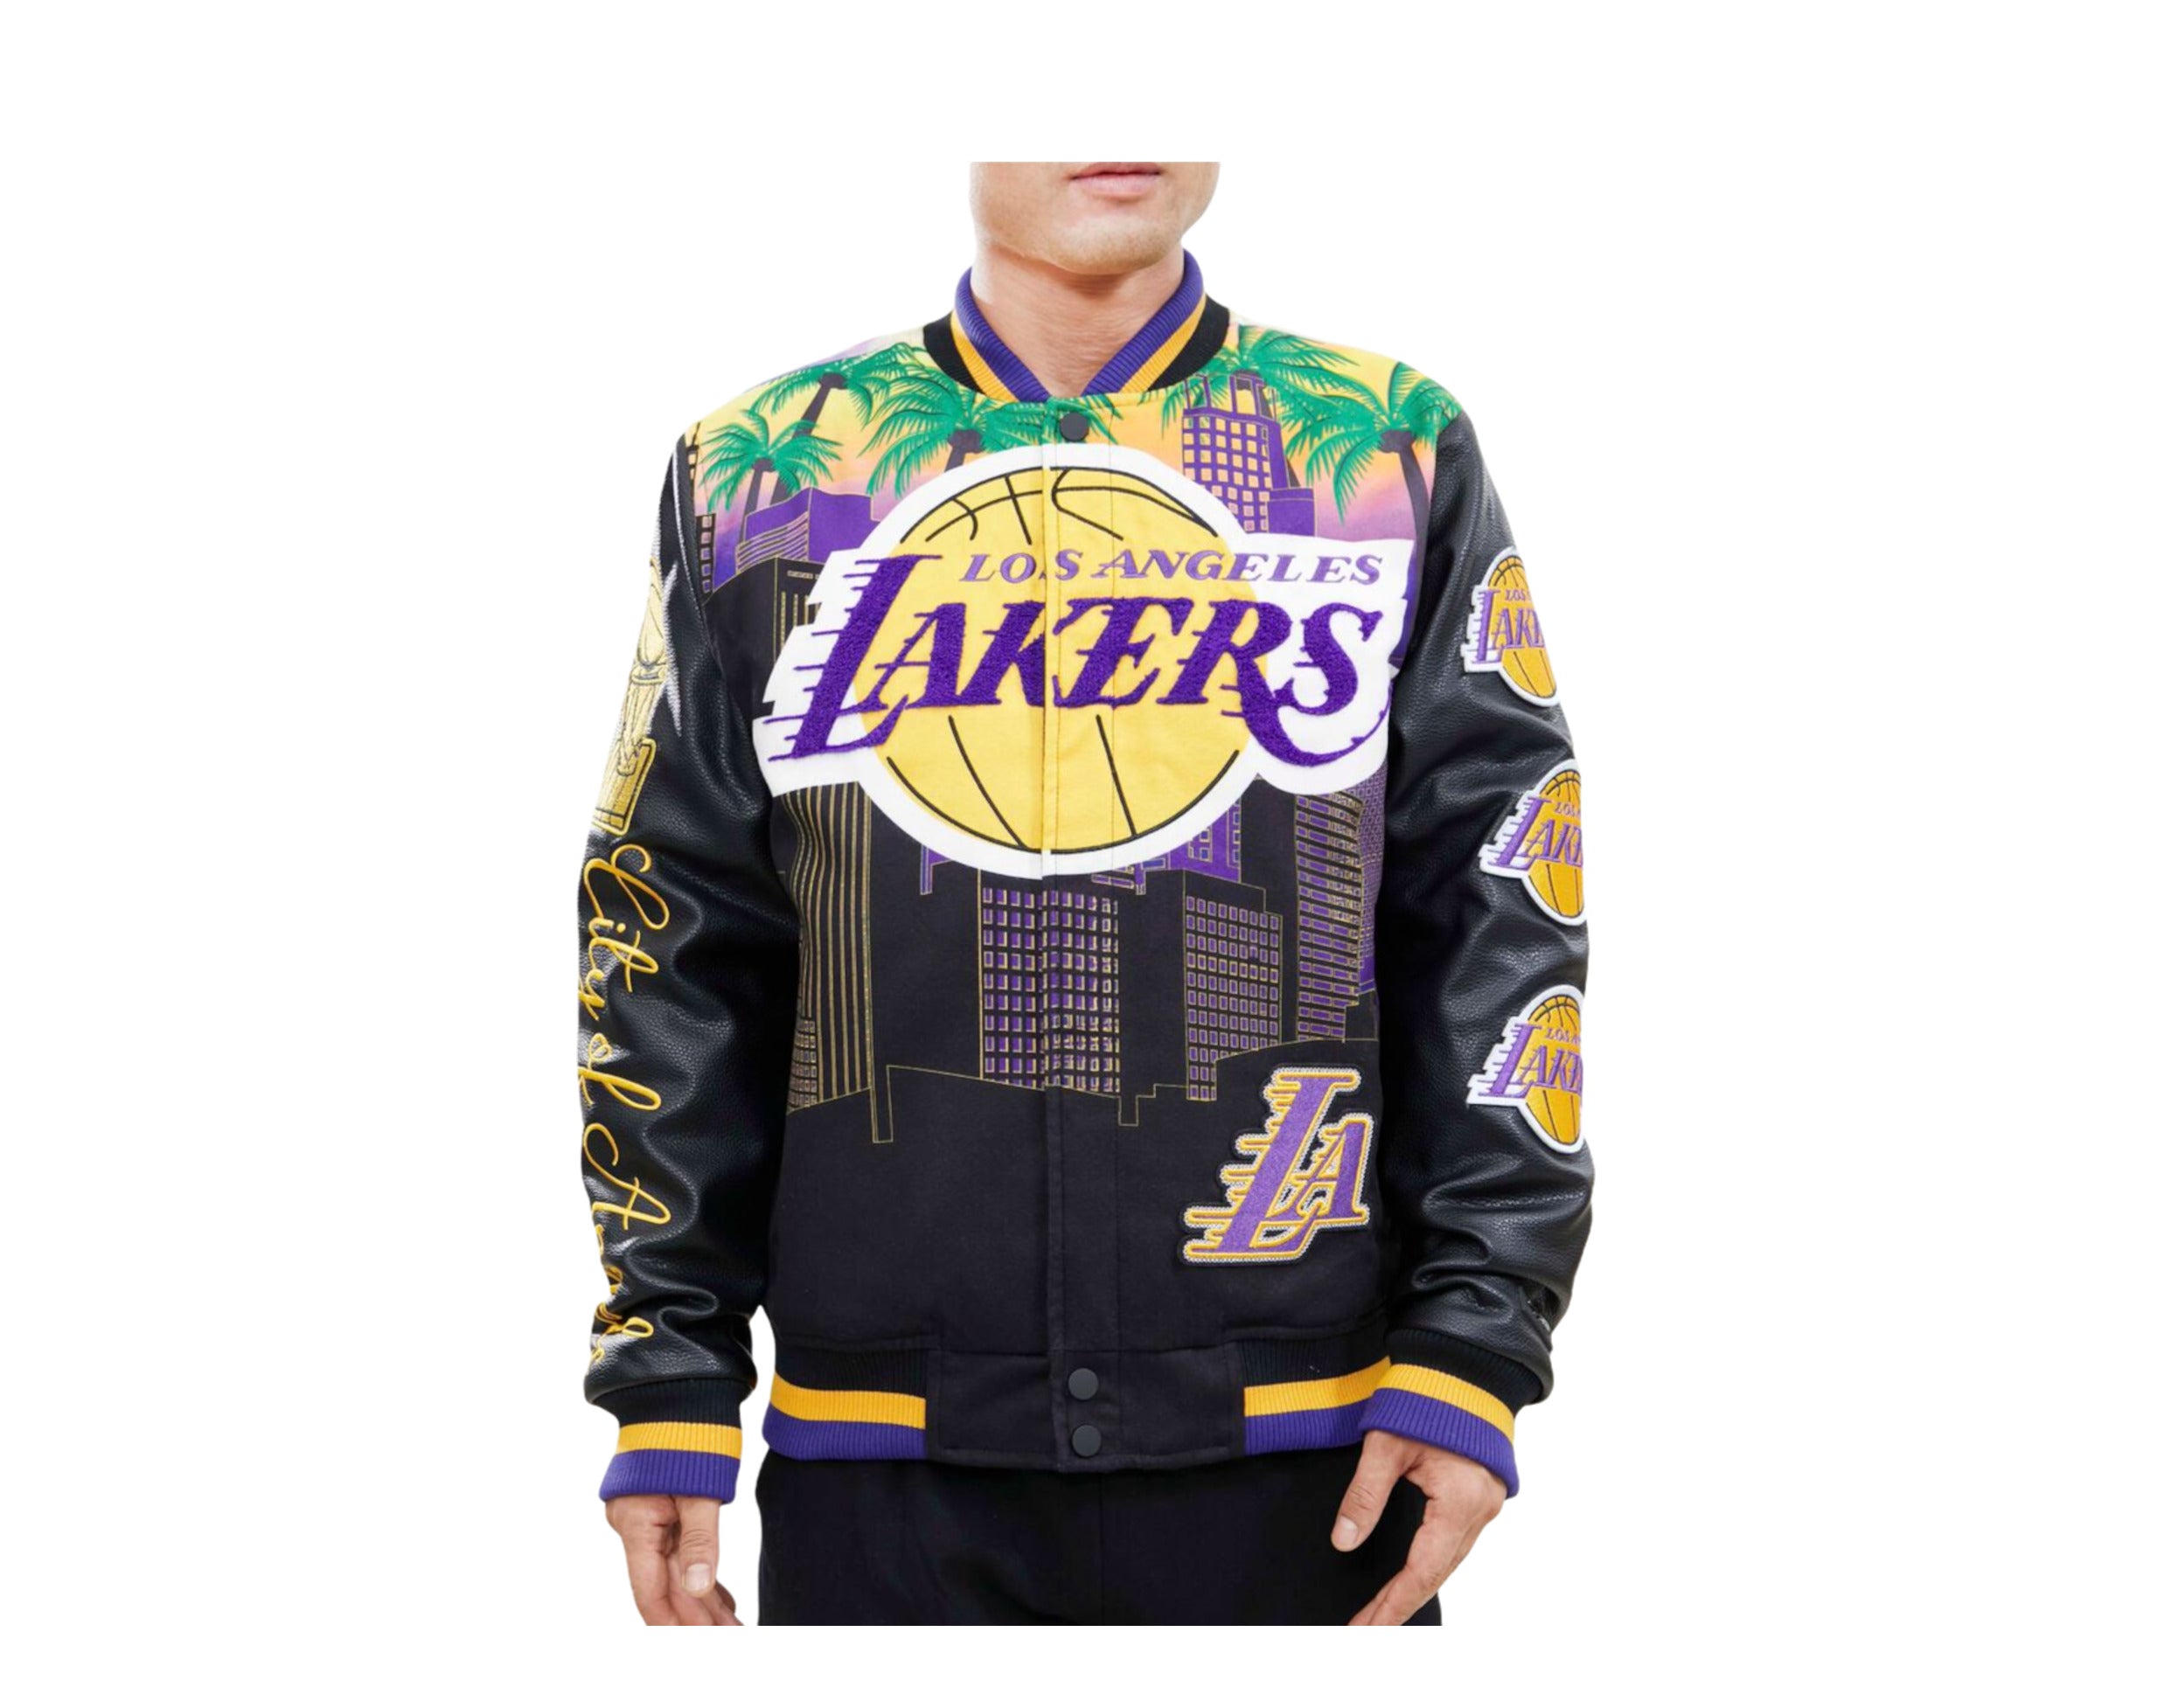 Mens Los Angeles Lakers Jacket, Lakers Pullover, Los Angeles Lakers Varsity  Jackets, Fleece Jacket